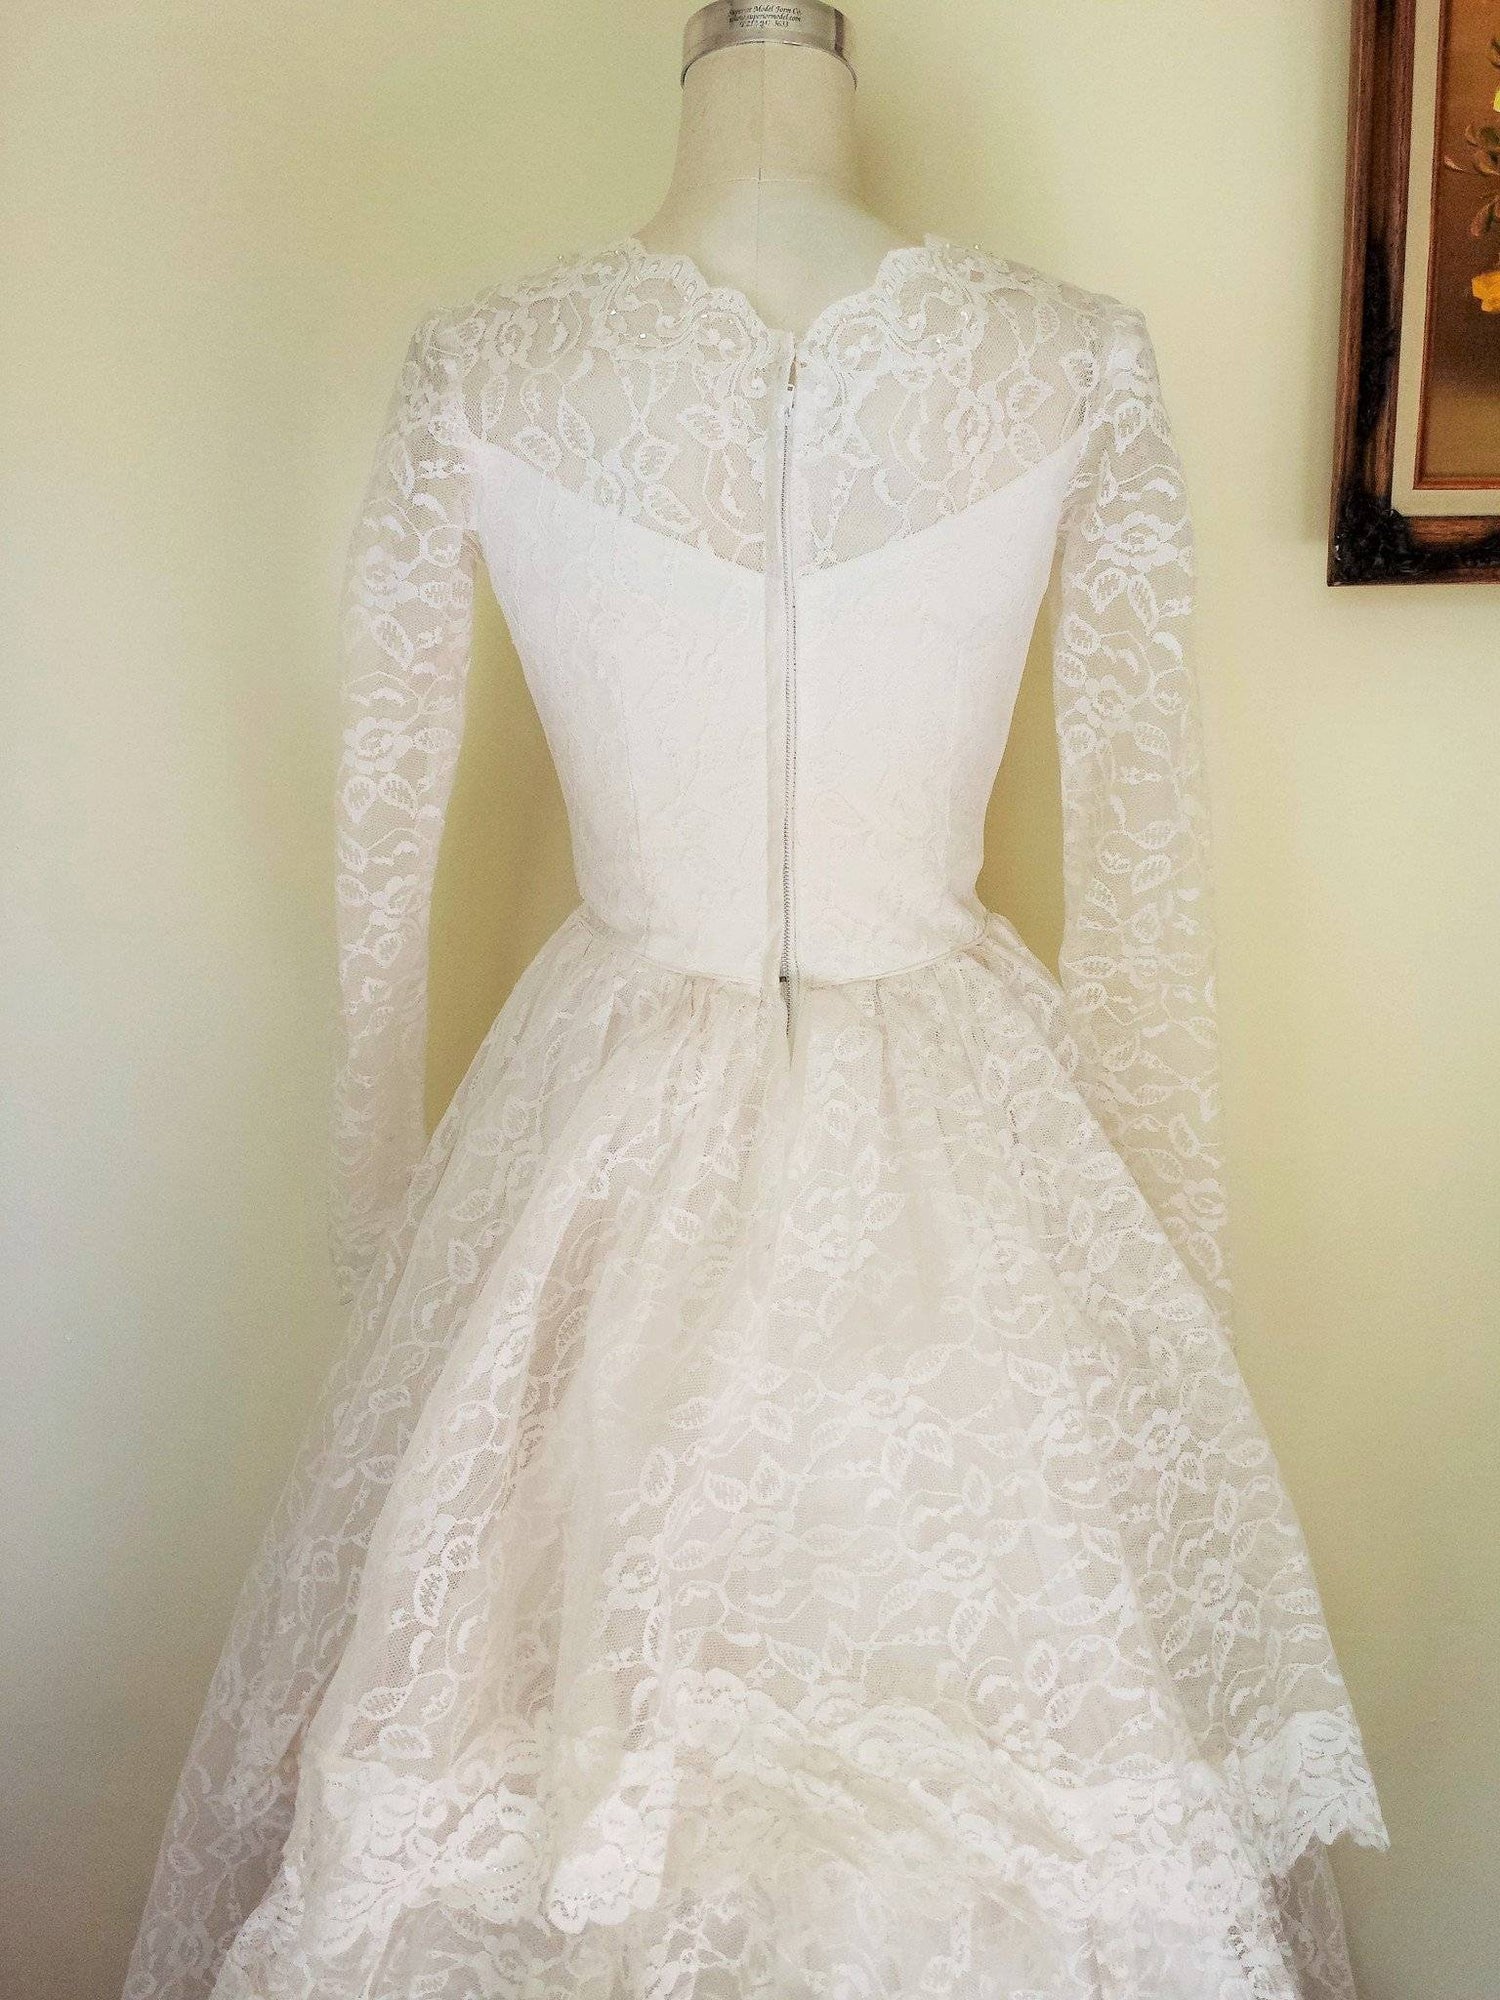 Vintage 1950s Grace Kelly Style Lace Wedding Gown-Toadstool Farm Vintage-1950s Dress,1950s Weddind Dress,50s Bridal Gown,50s Dress,Bridal,Bride,Grace Kelly Style,Lace Skirt,Metal Zipper,Vintage,Vintage Clothing,Vintage Dress,Vintage Dresses,Vintage Wedding Gown